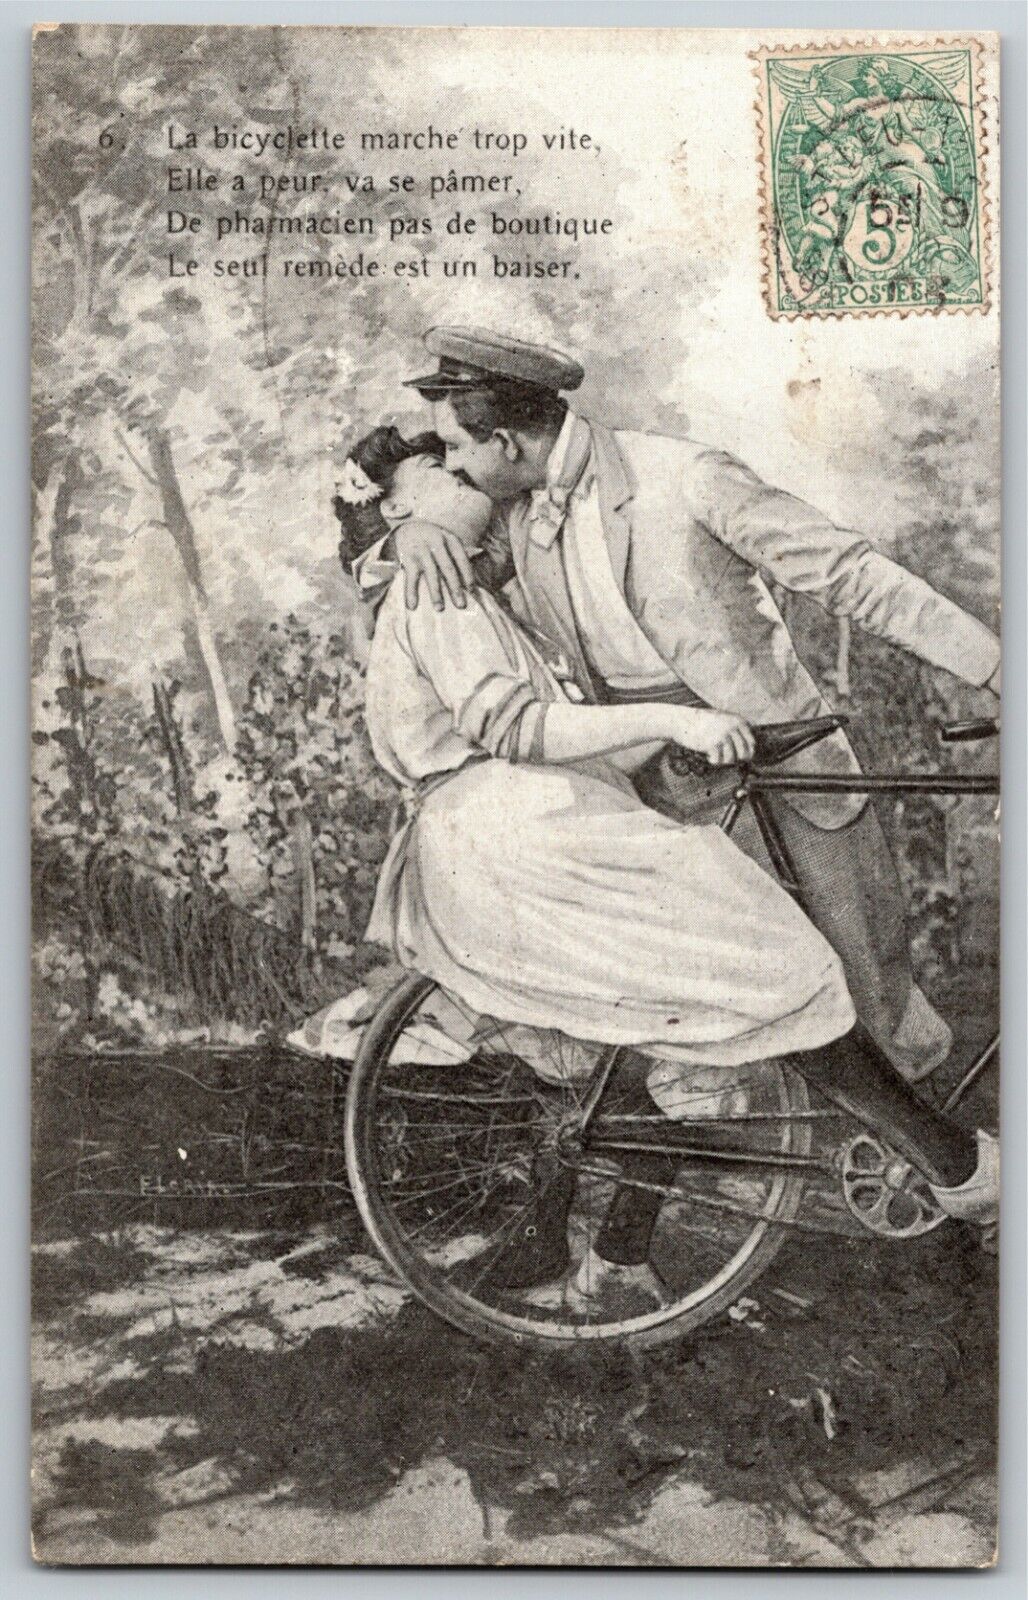 Romantic Bicycle Themed Series of 6 French Post Cards c1905?-1912?